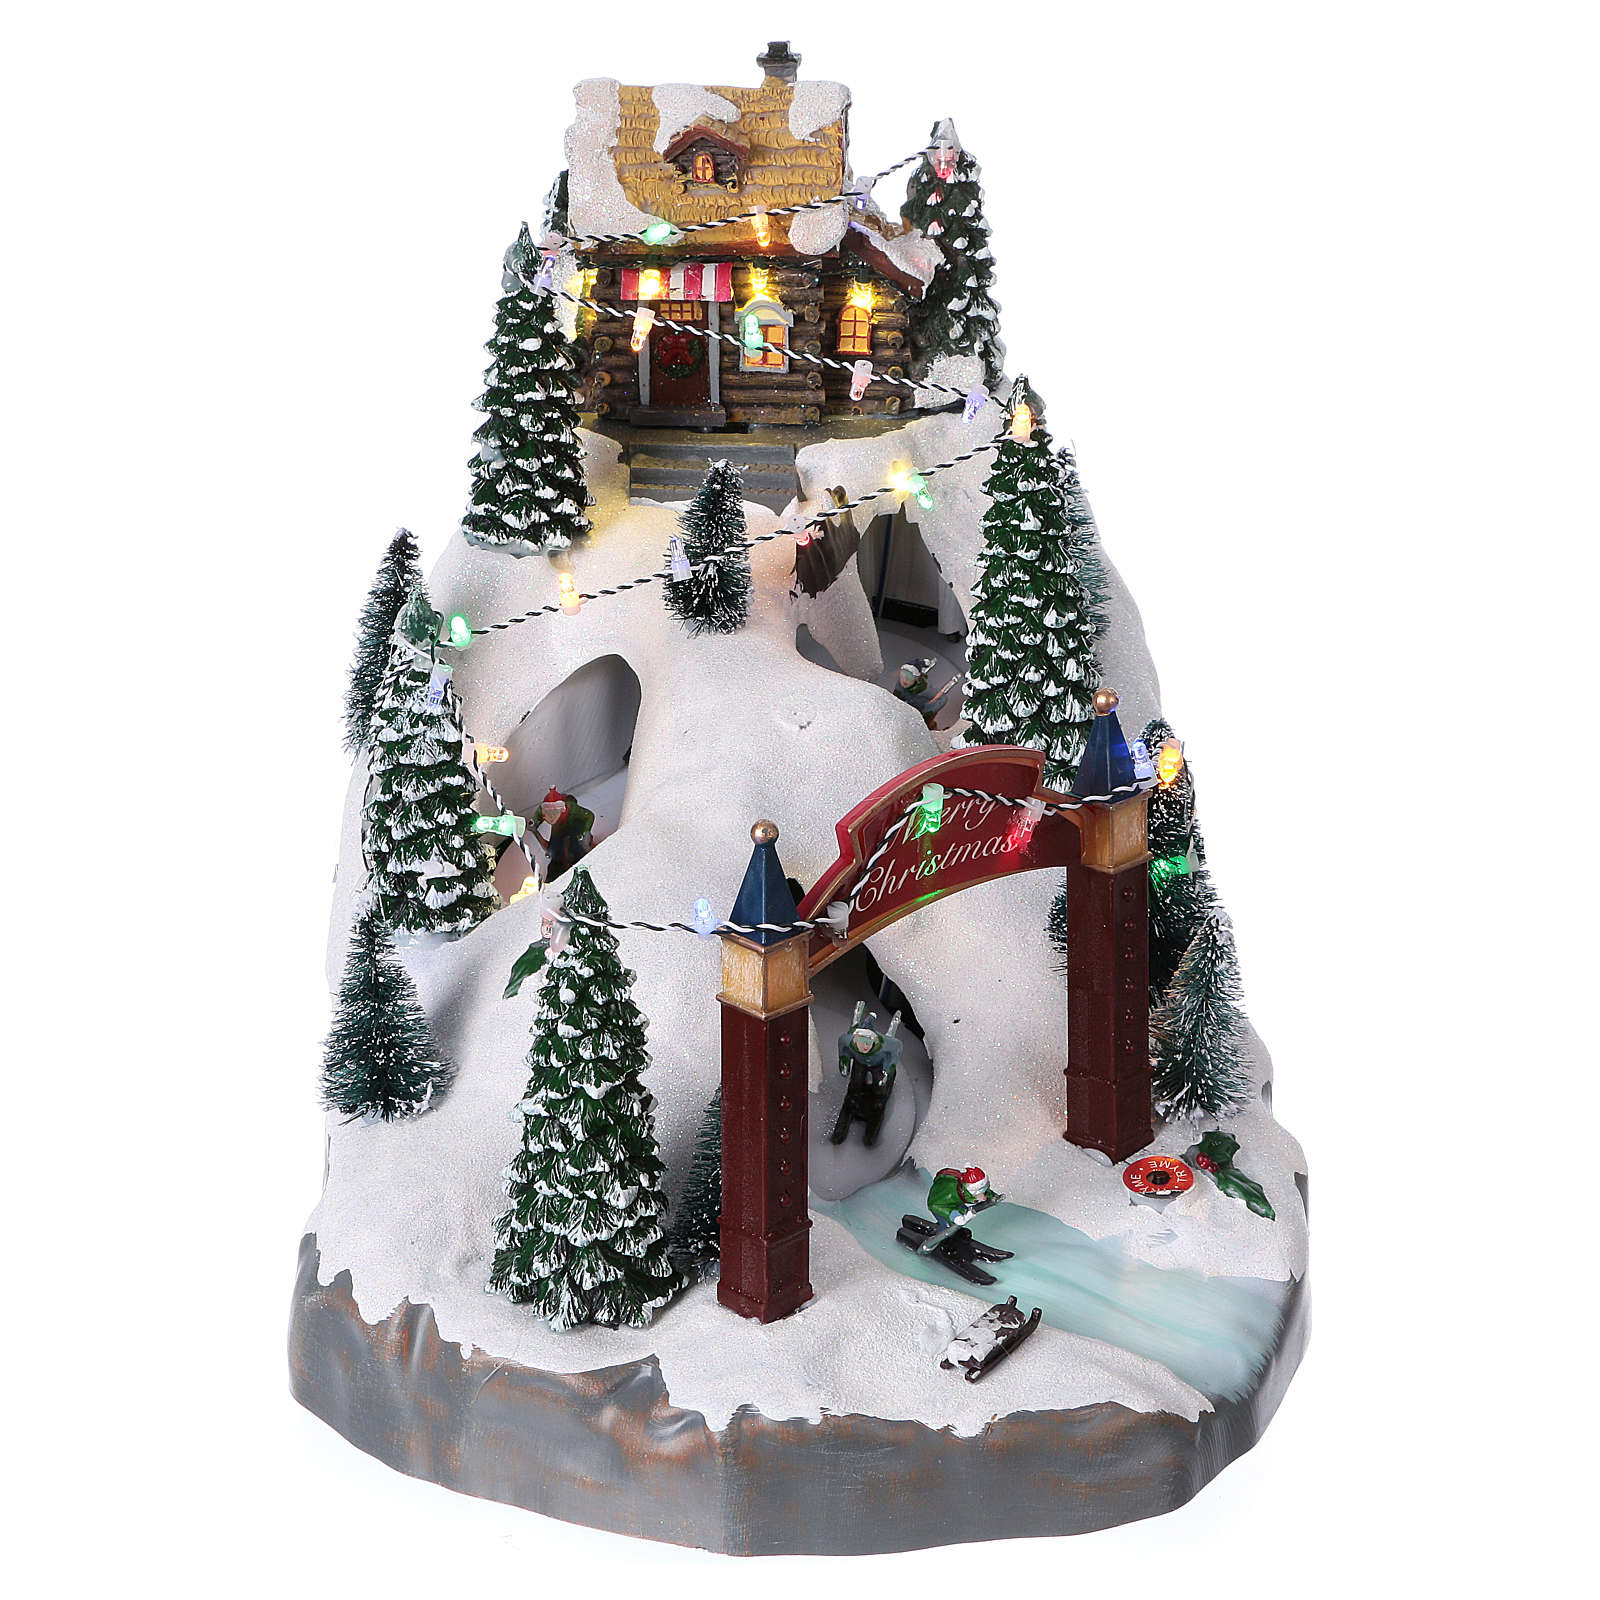 Christmas Holiday Village with In-Motion Skiers 25x25x35 cm | online ...